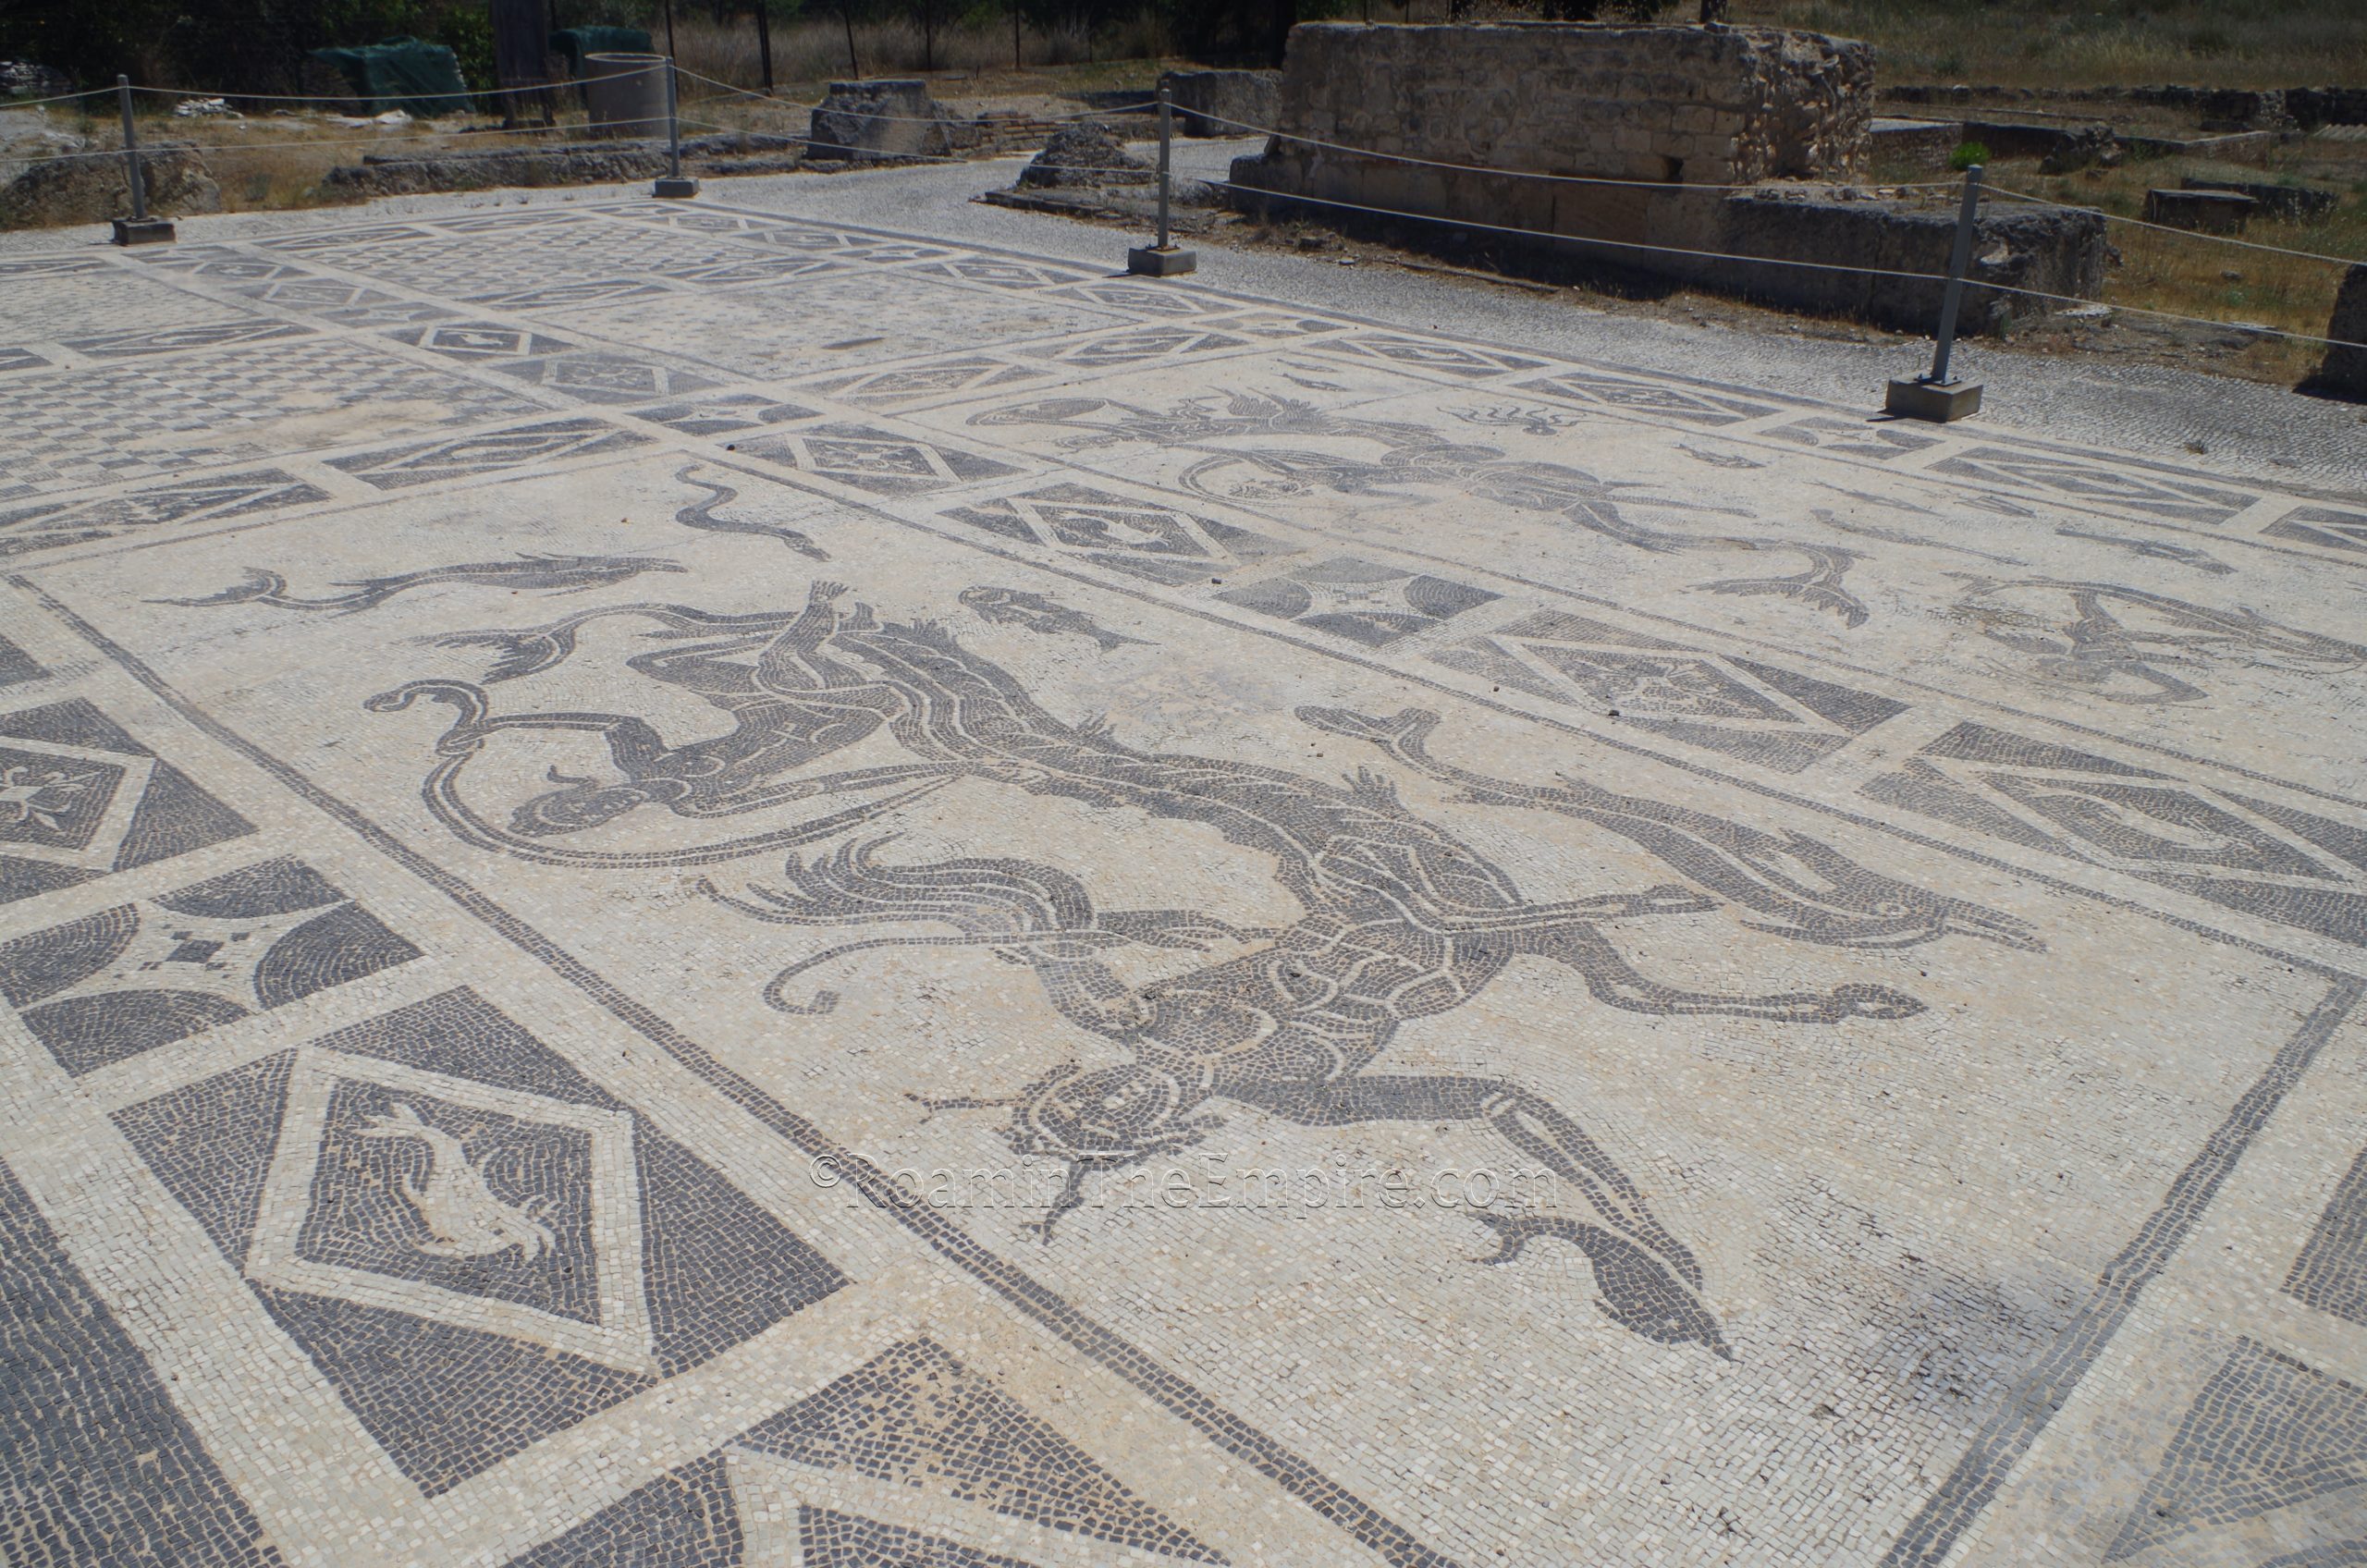 Mosaic in the reception area of the Roman baths. Isthmia.